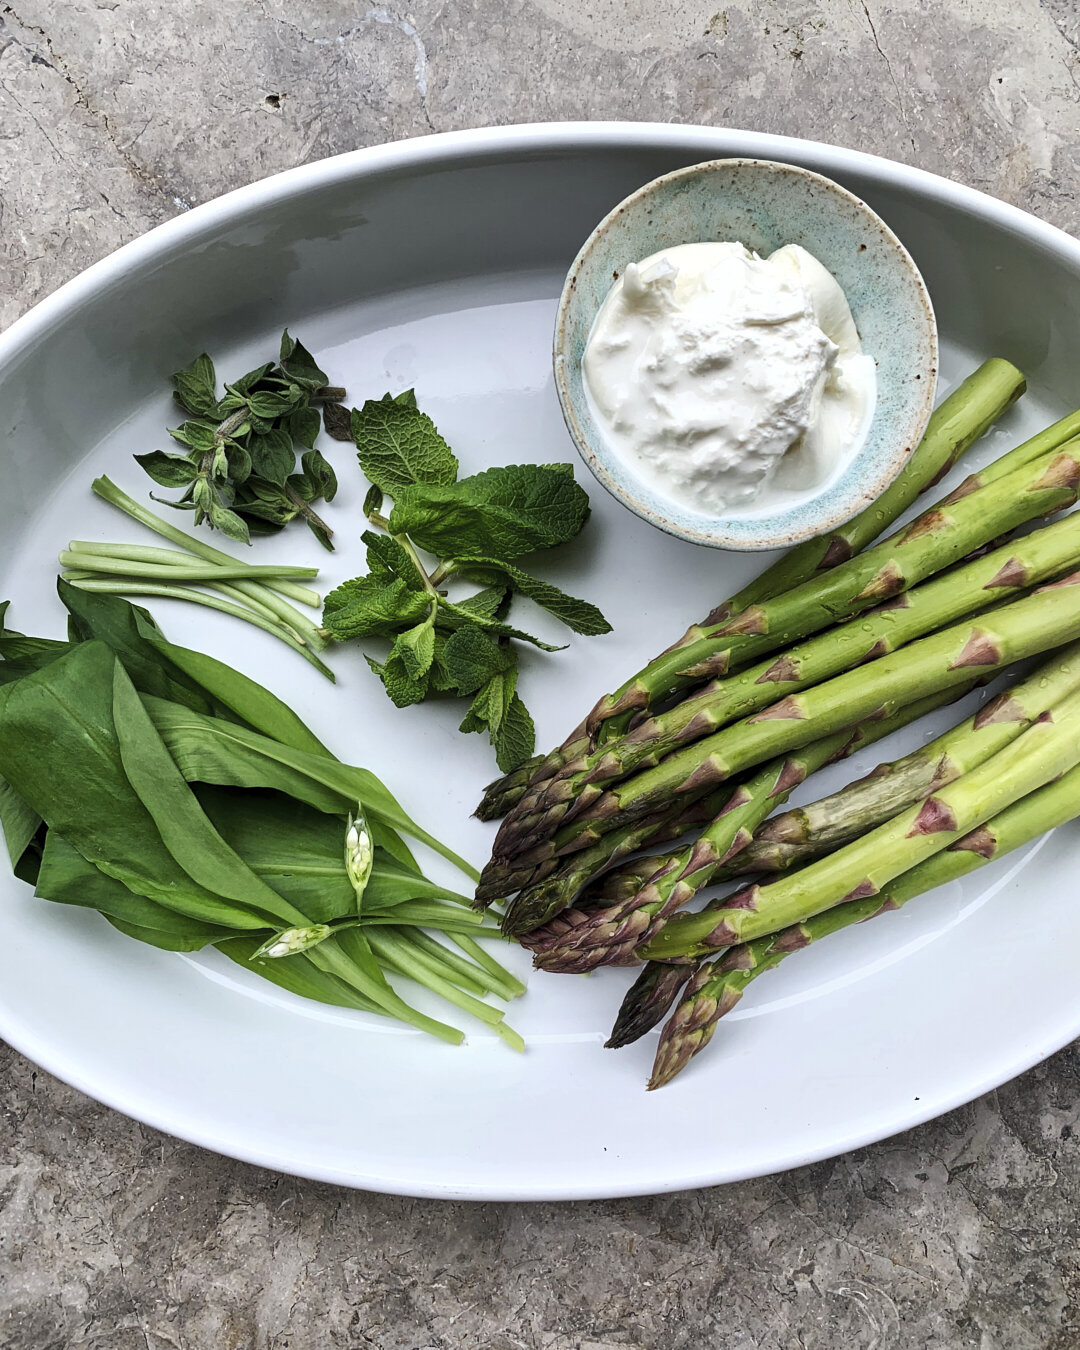 #OFFTHEPASS WITH TOMOS PARRY - Asparagus Roasted in Wild Garlic with ...